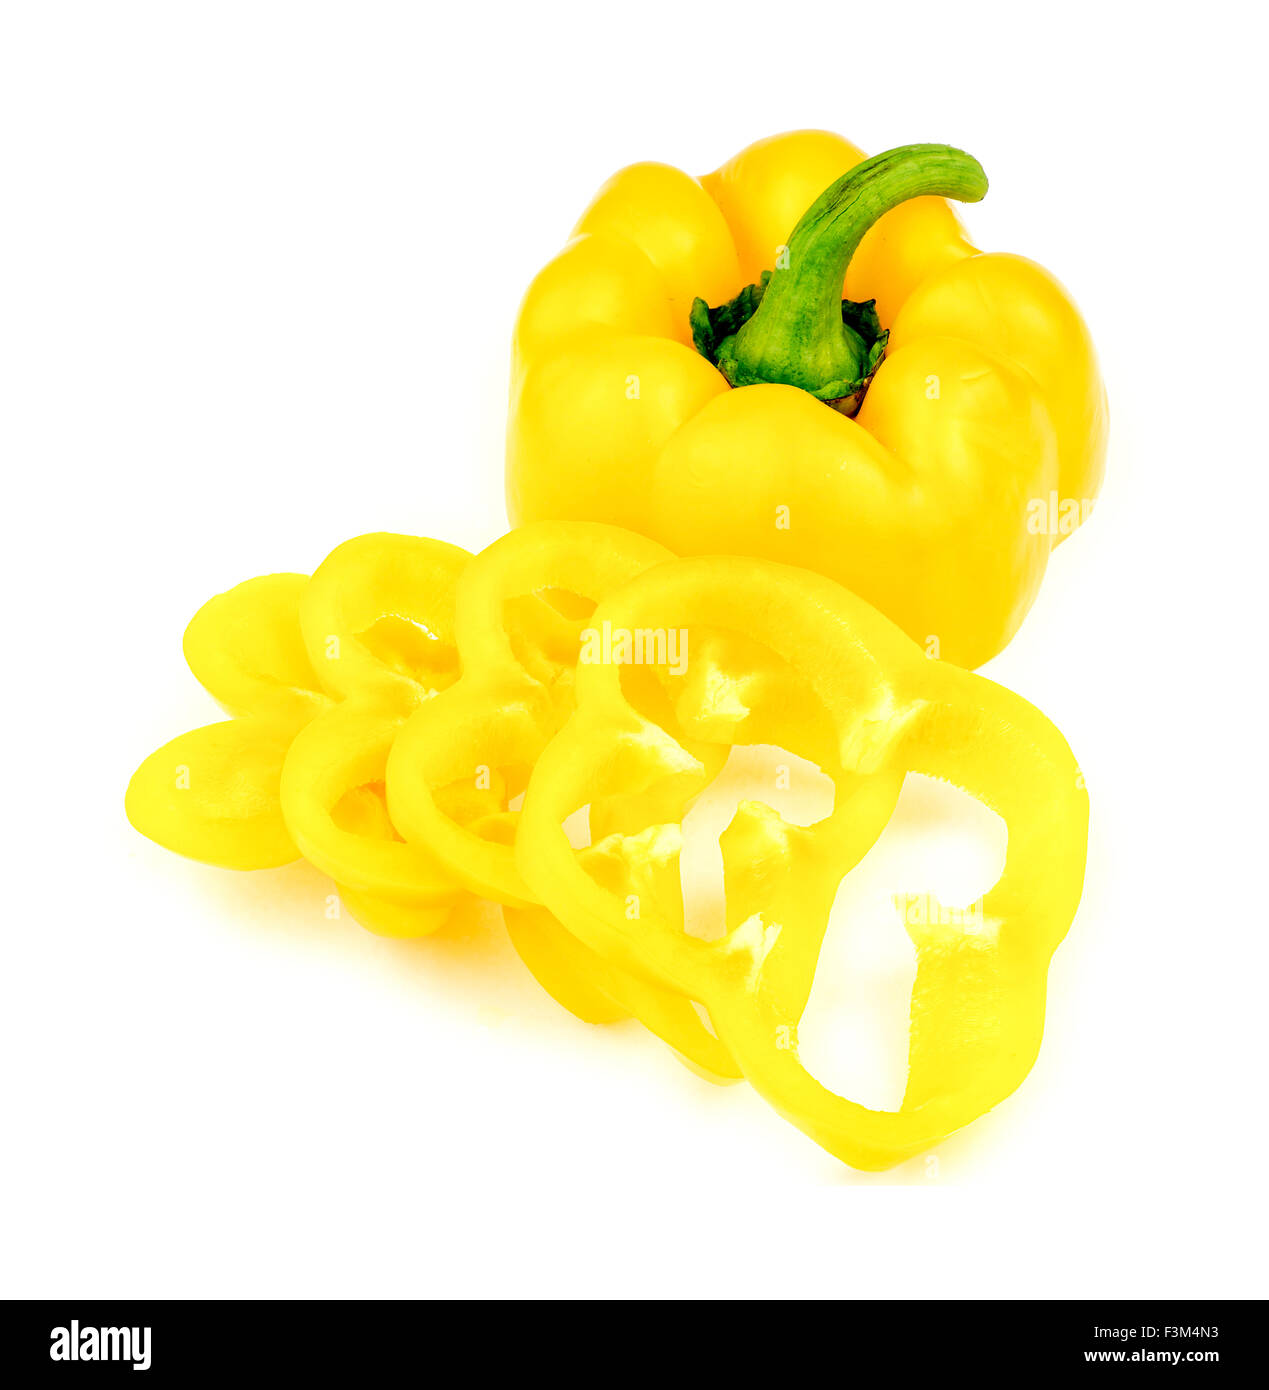 Whole yellow capsicum pepper with sliced cross sections Stock Photo